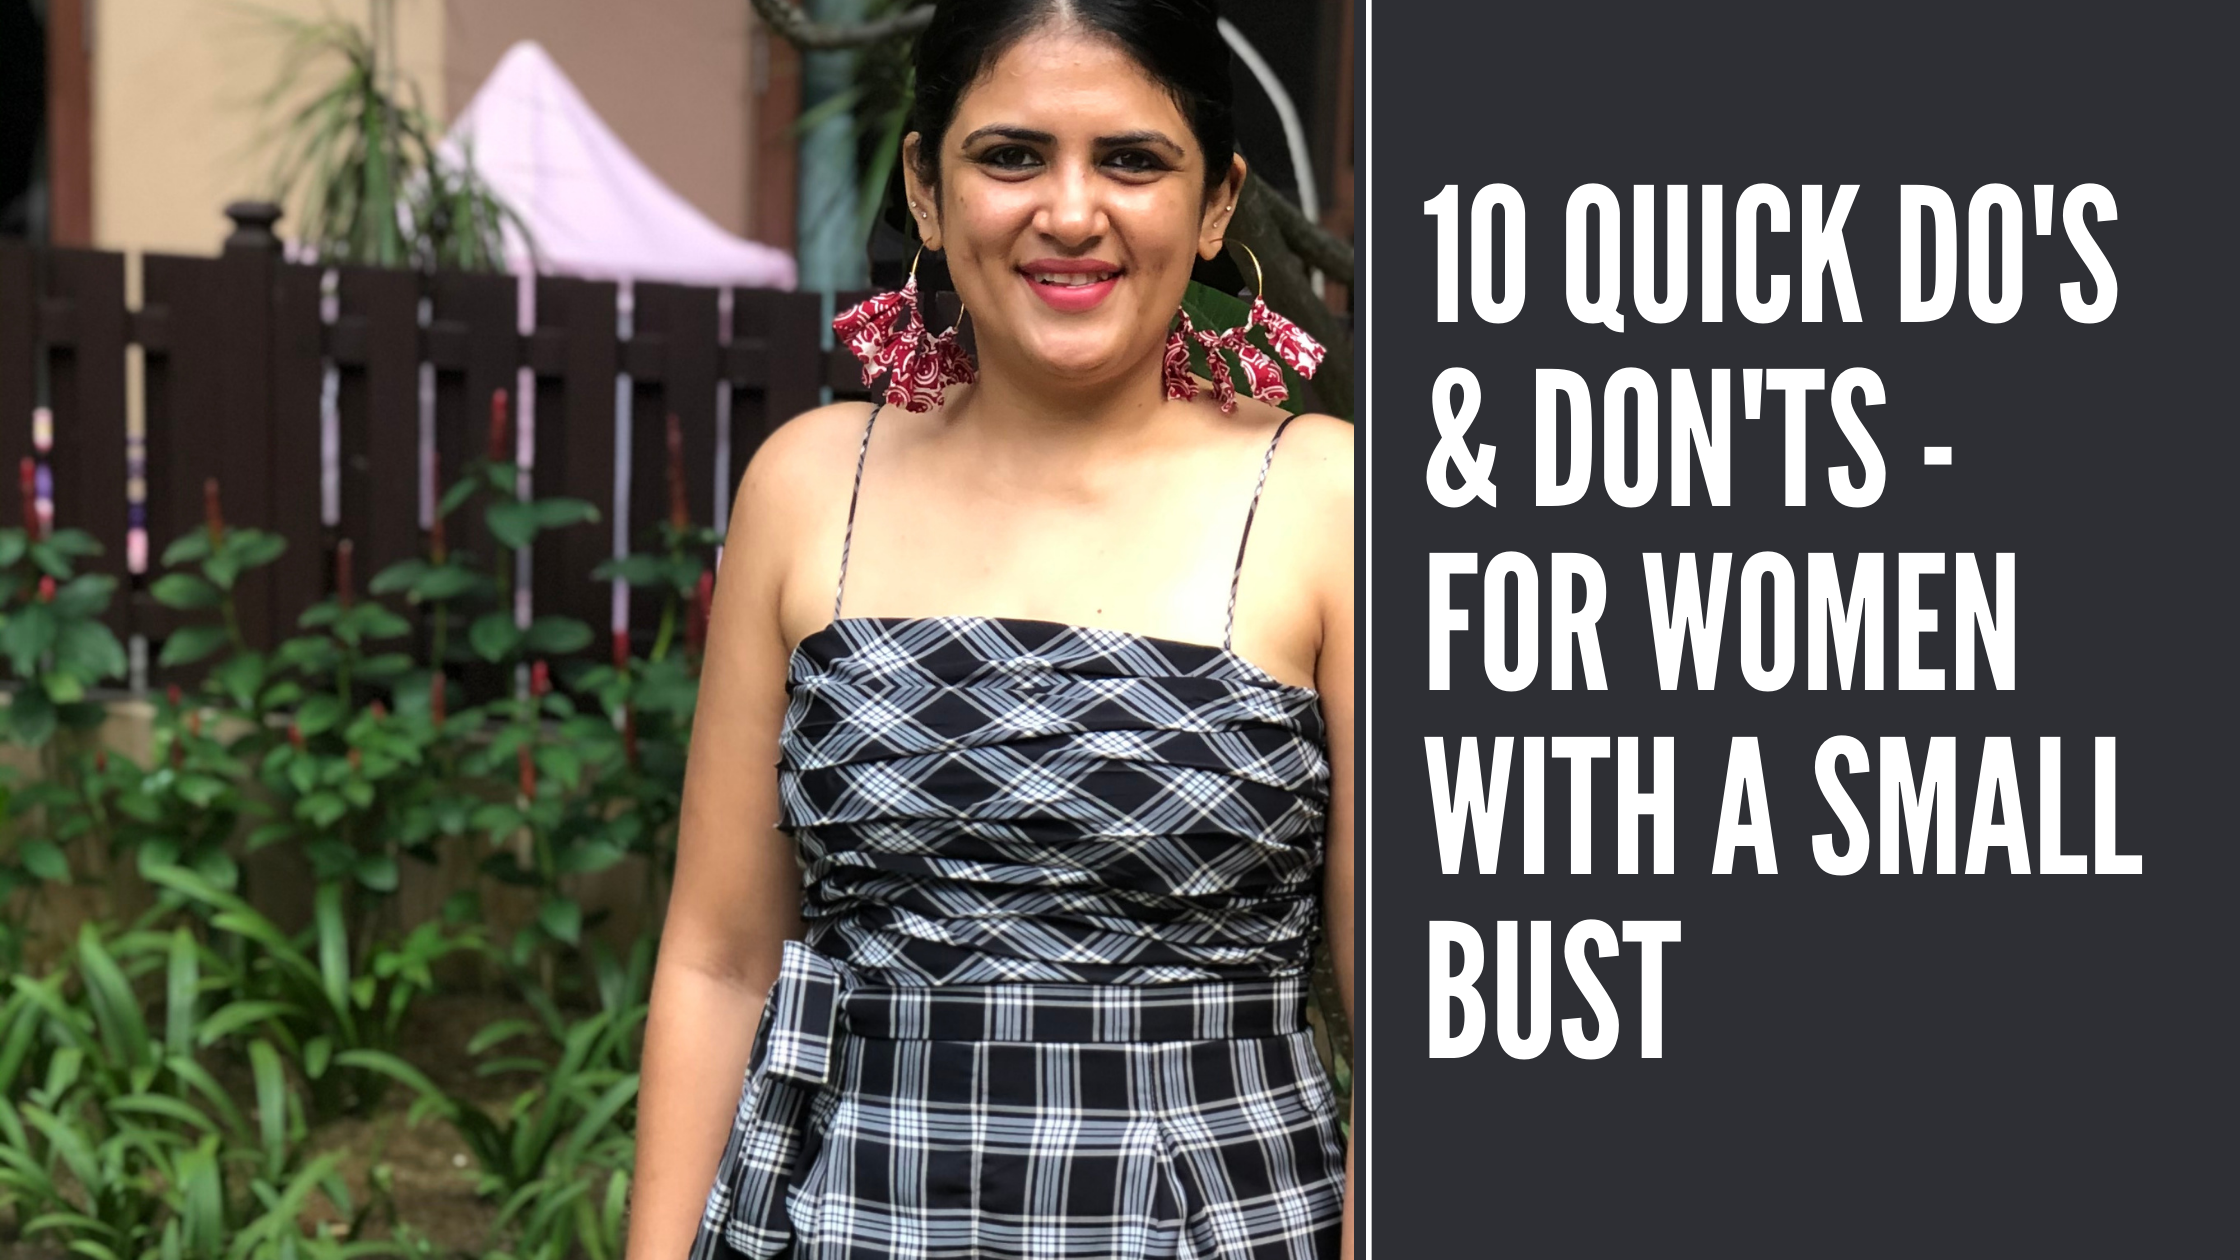 10 quick do's & don'ts - for women with small bust - Jainee Gandhi